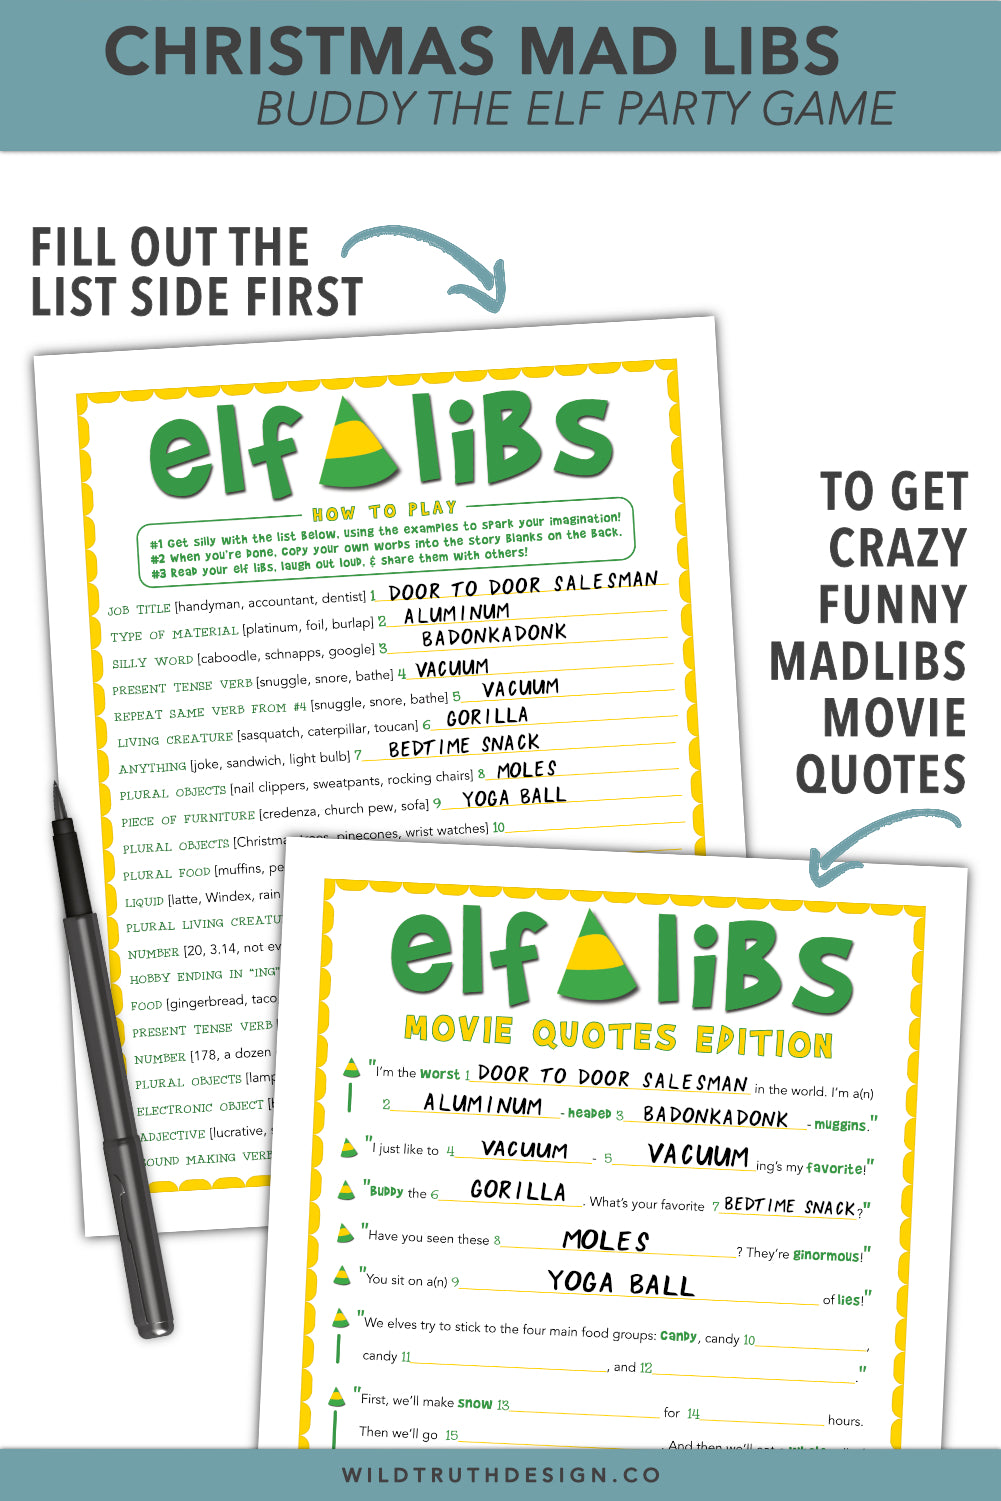 Christmas Mad Libs - Buddy The Elf Party Game